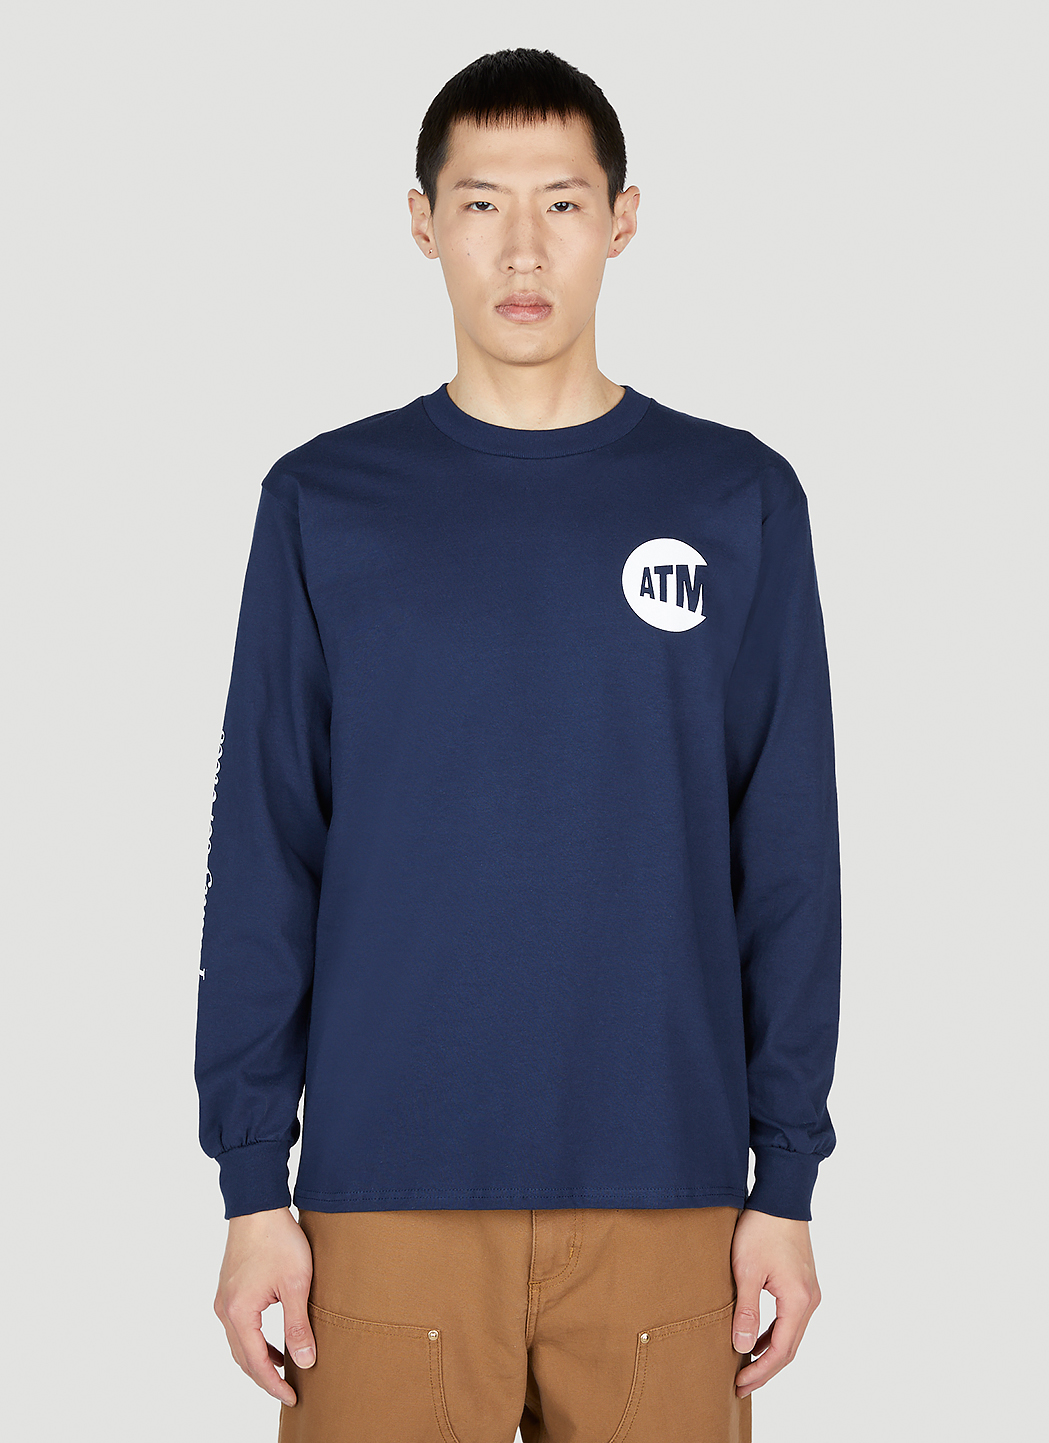 ATM Cash Only Long-Sleeved T-Shirt